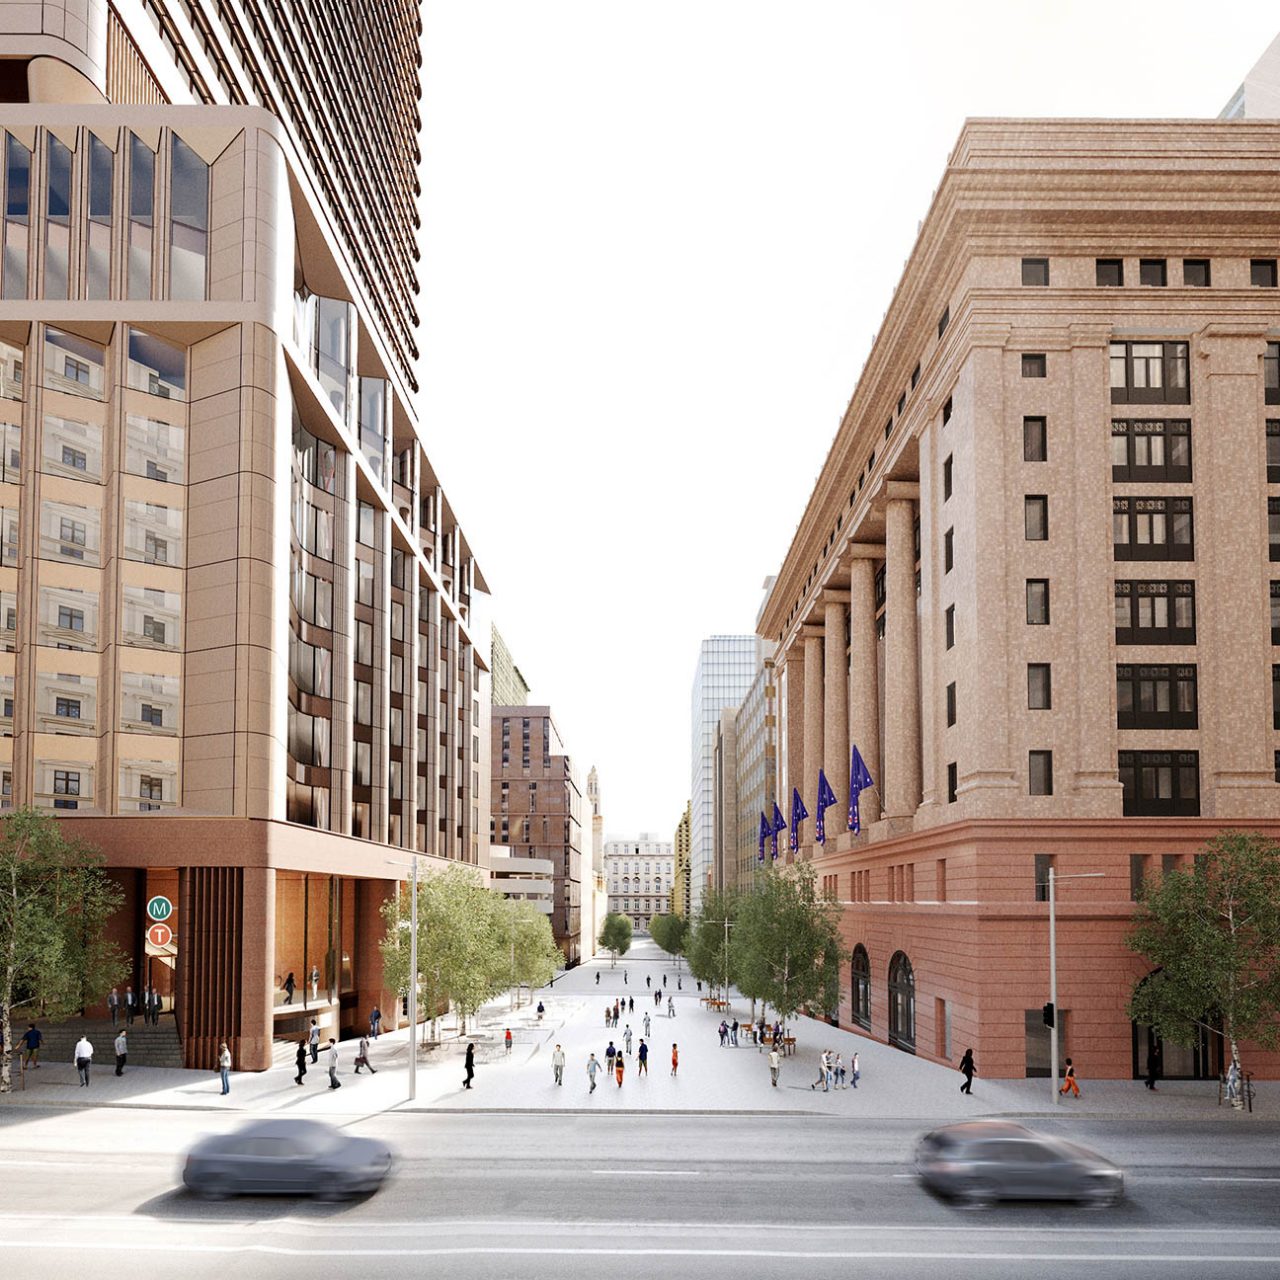 Artist's impression of the Martin Place precinct, looking west on Elizabeth Street, with south tower and station entrance on left